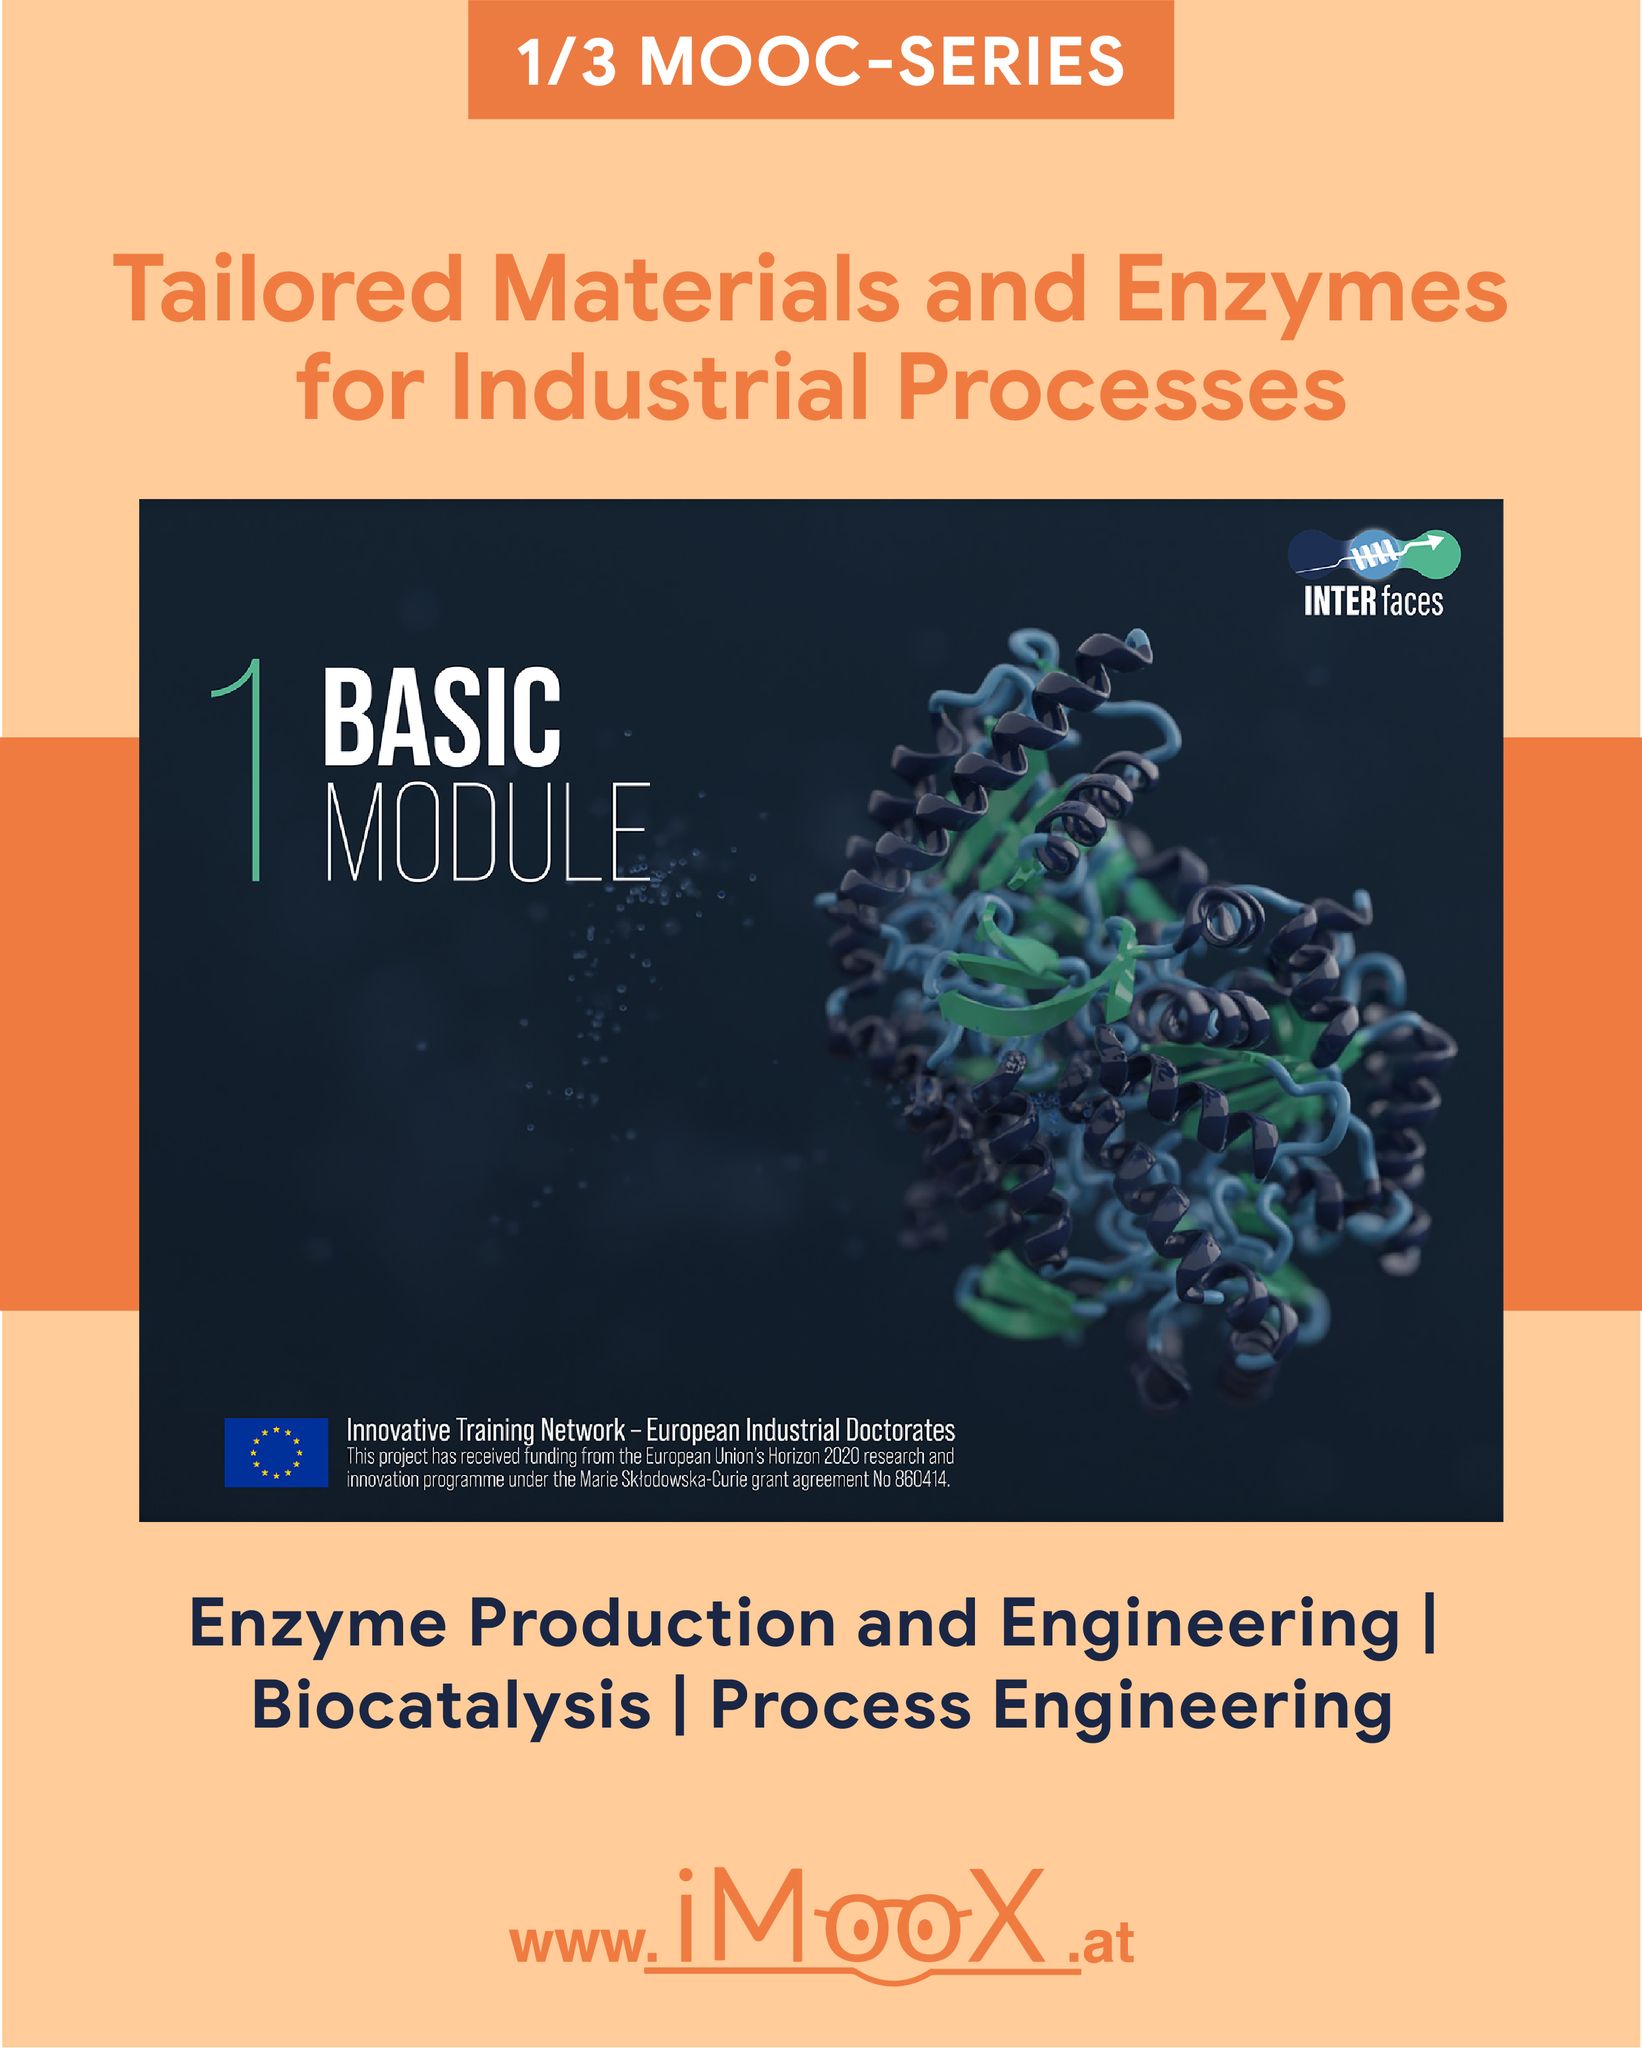 In this MOOC you learn what is known as biocatalysis, and why this key emerging technology is ...